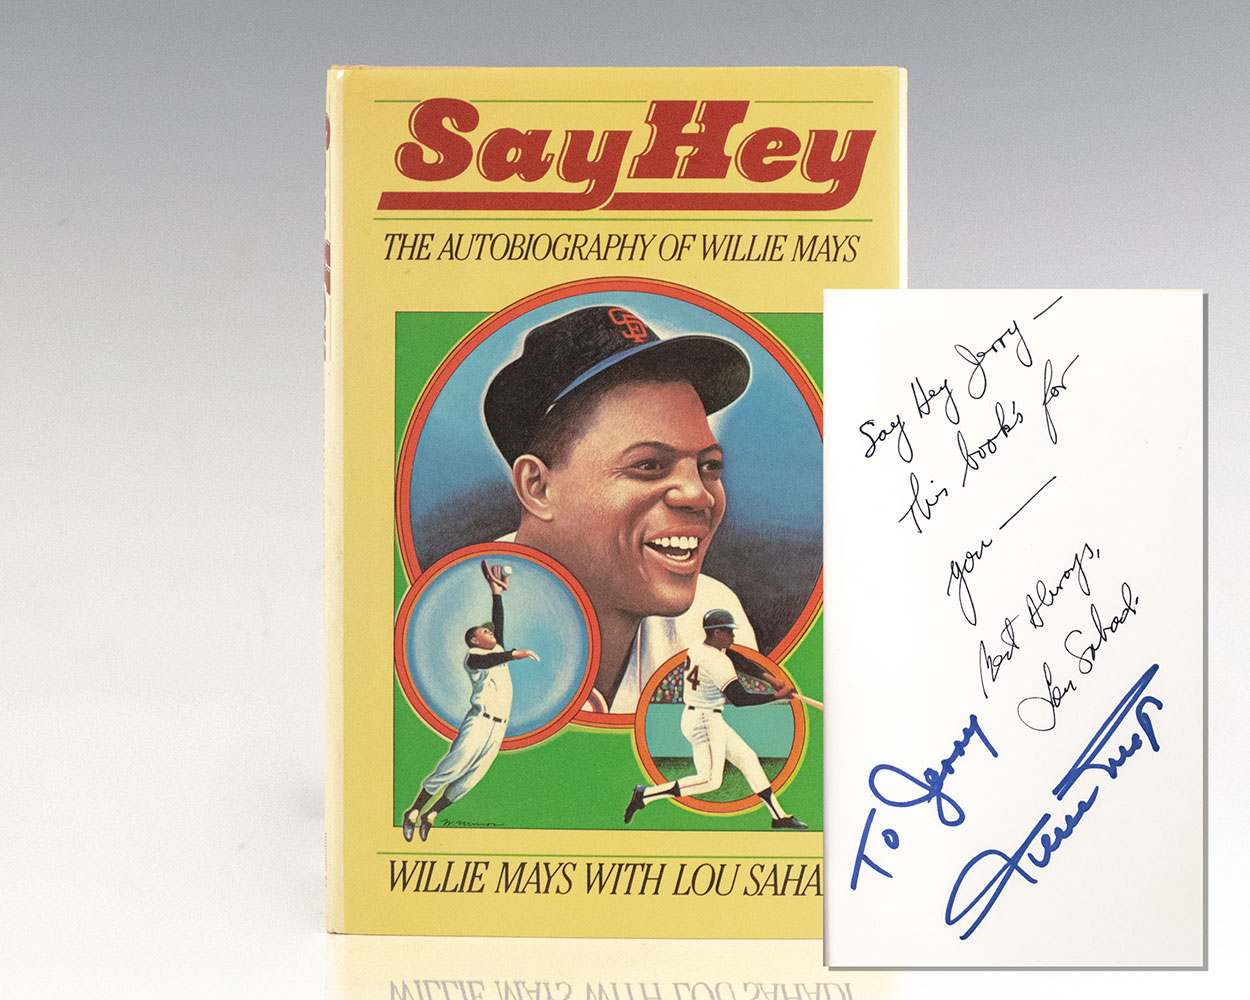 Willie Mays Bio And Facts